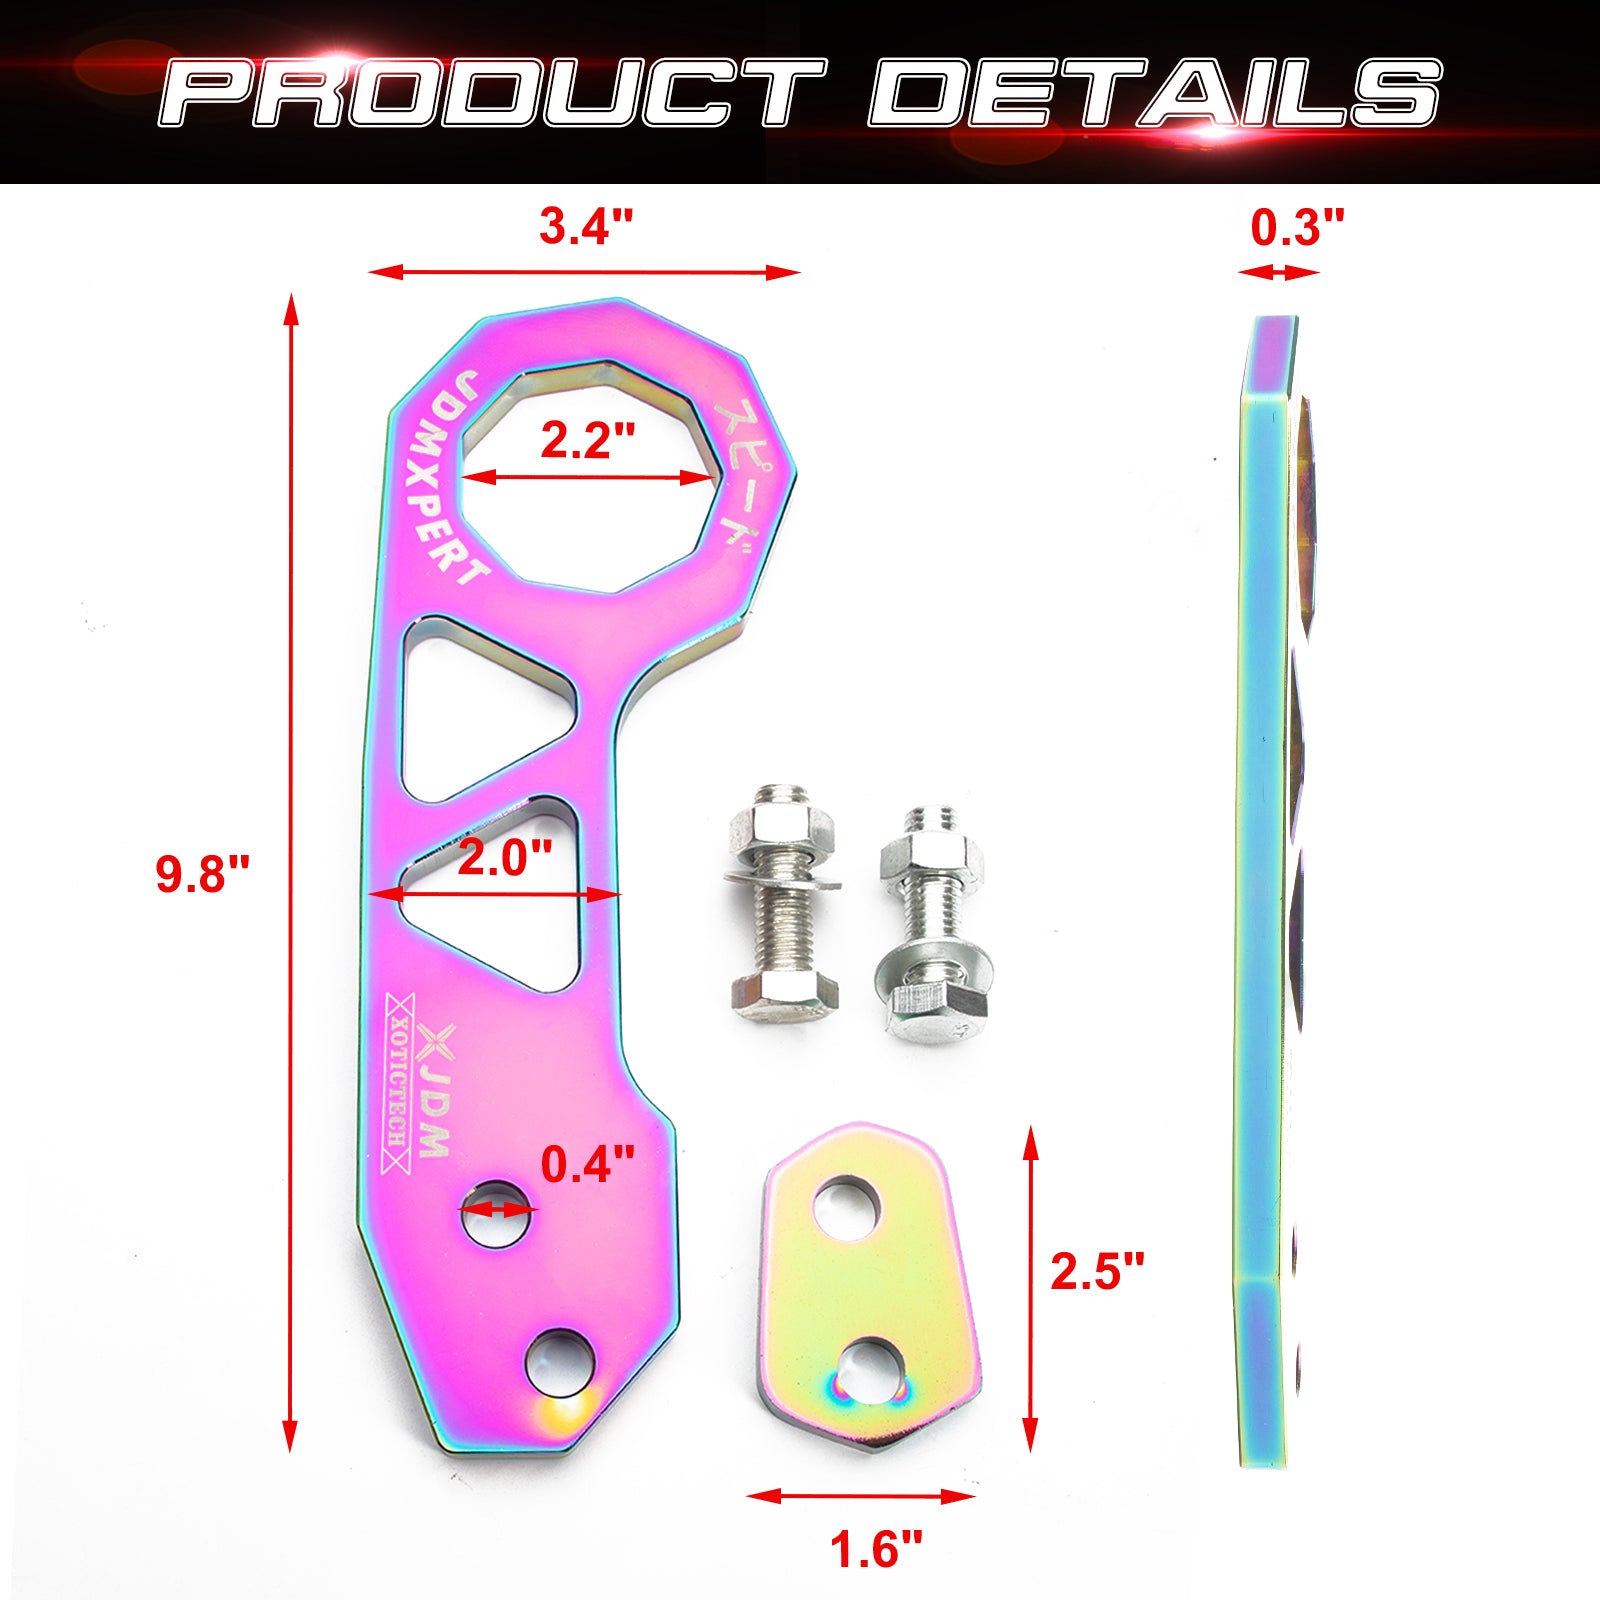 Xotic Tech Auto Aluminum JDM Rear Tow Hook Kit Racing Style Trailer To